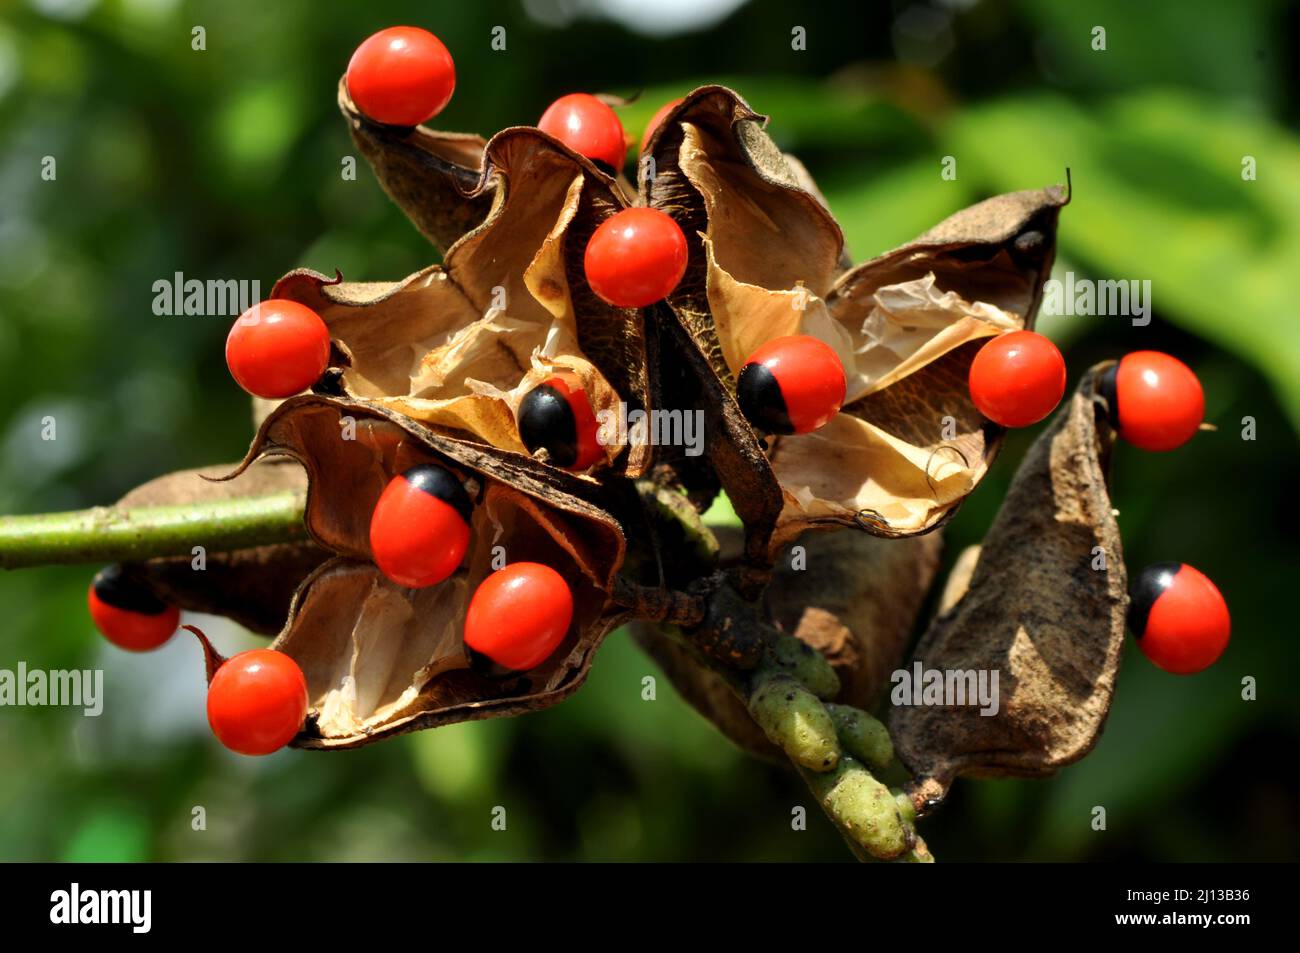 Adenanthera pavonina, the Red Sandalwood or Coral Tree is cultivated for forage, as an ornamental garden plant or urban tree as a medicinal plant and Stock Photo